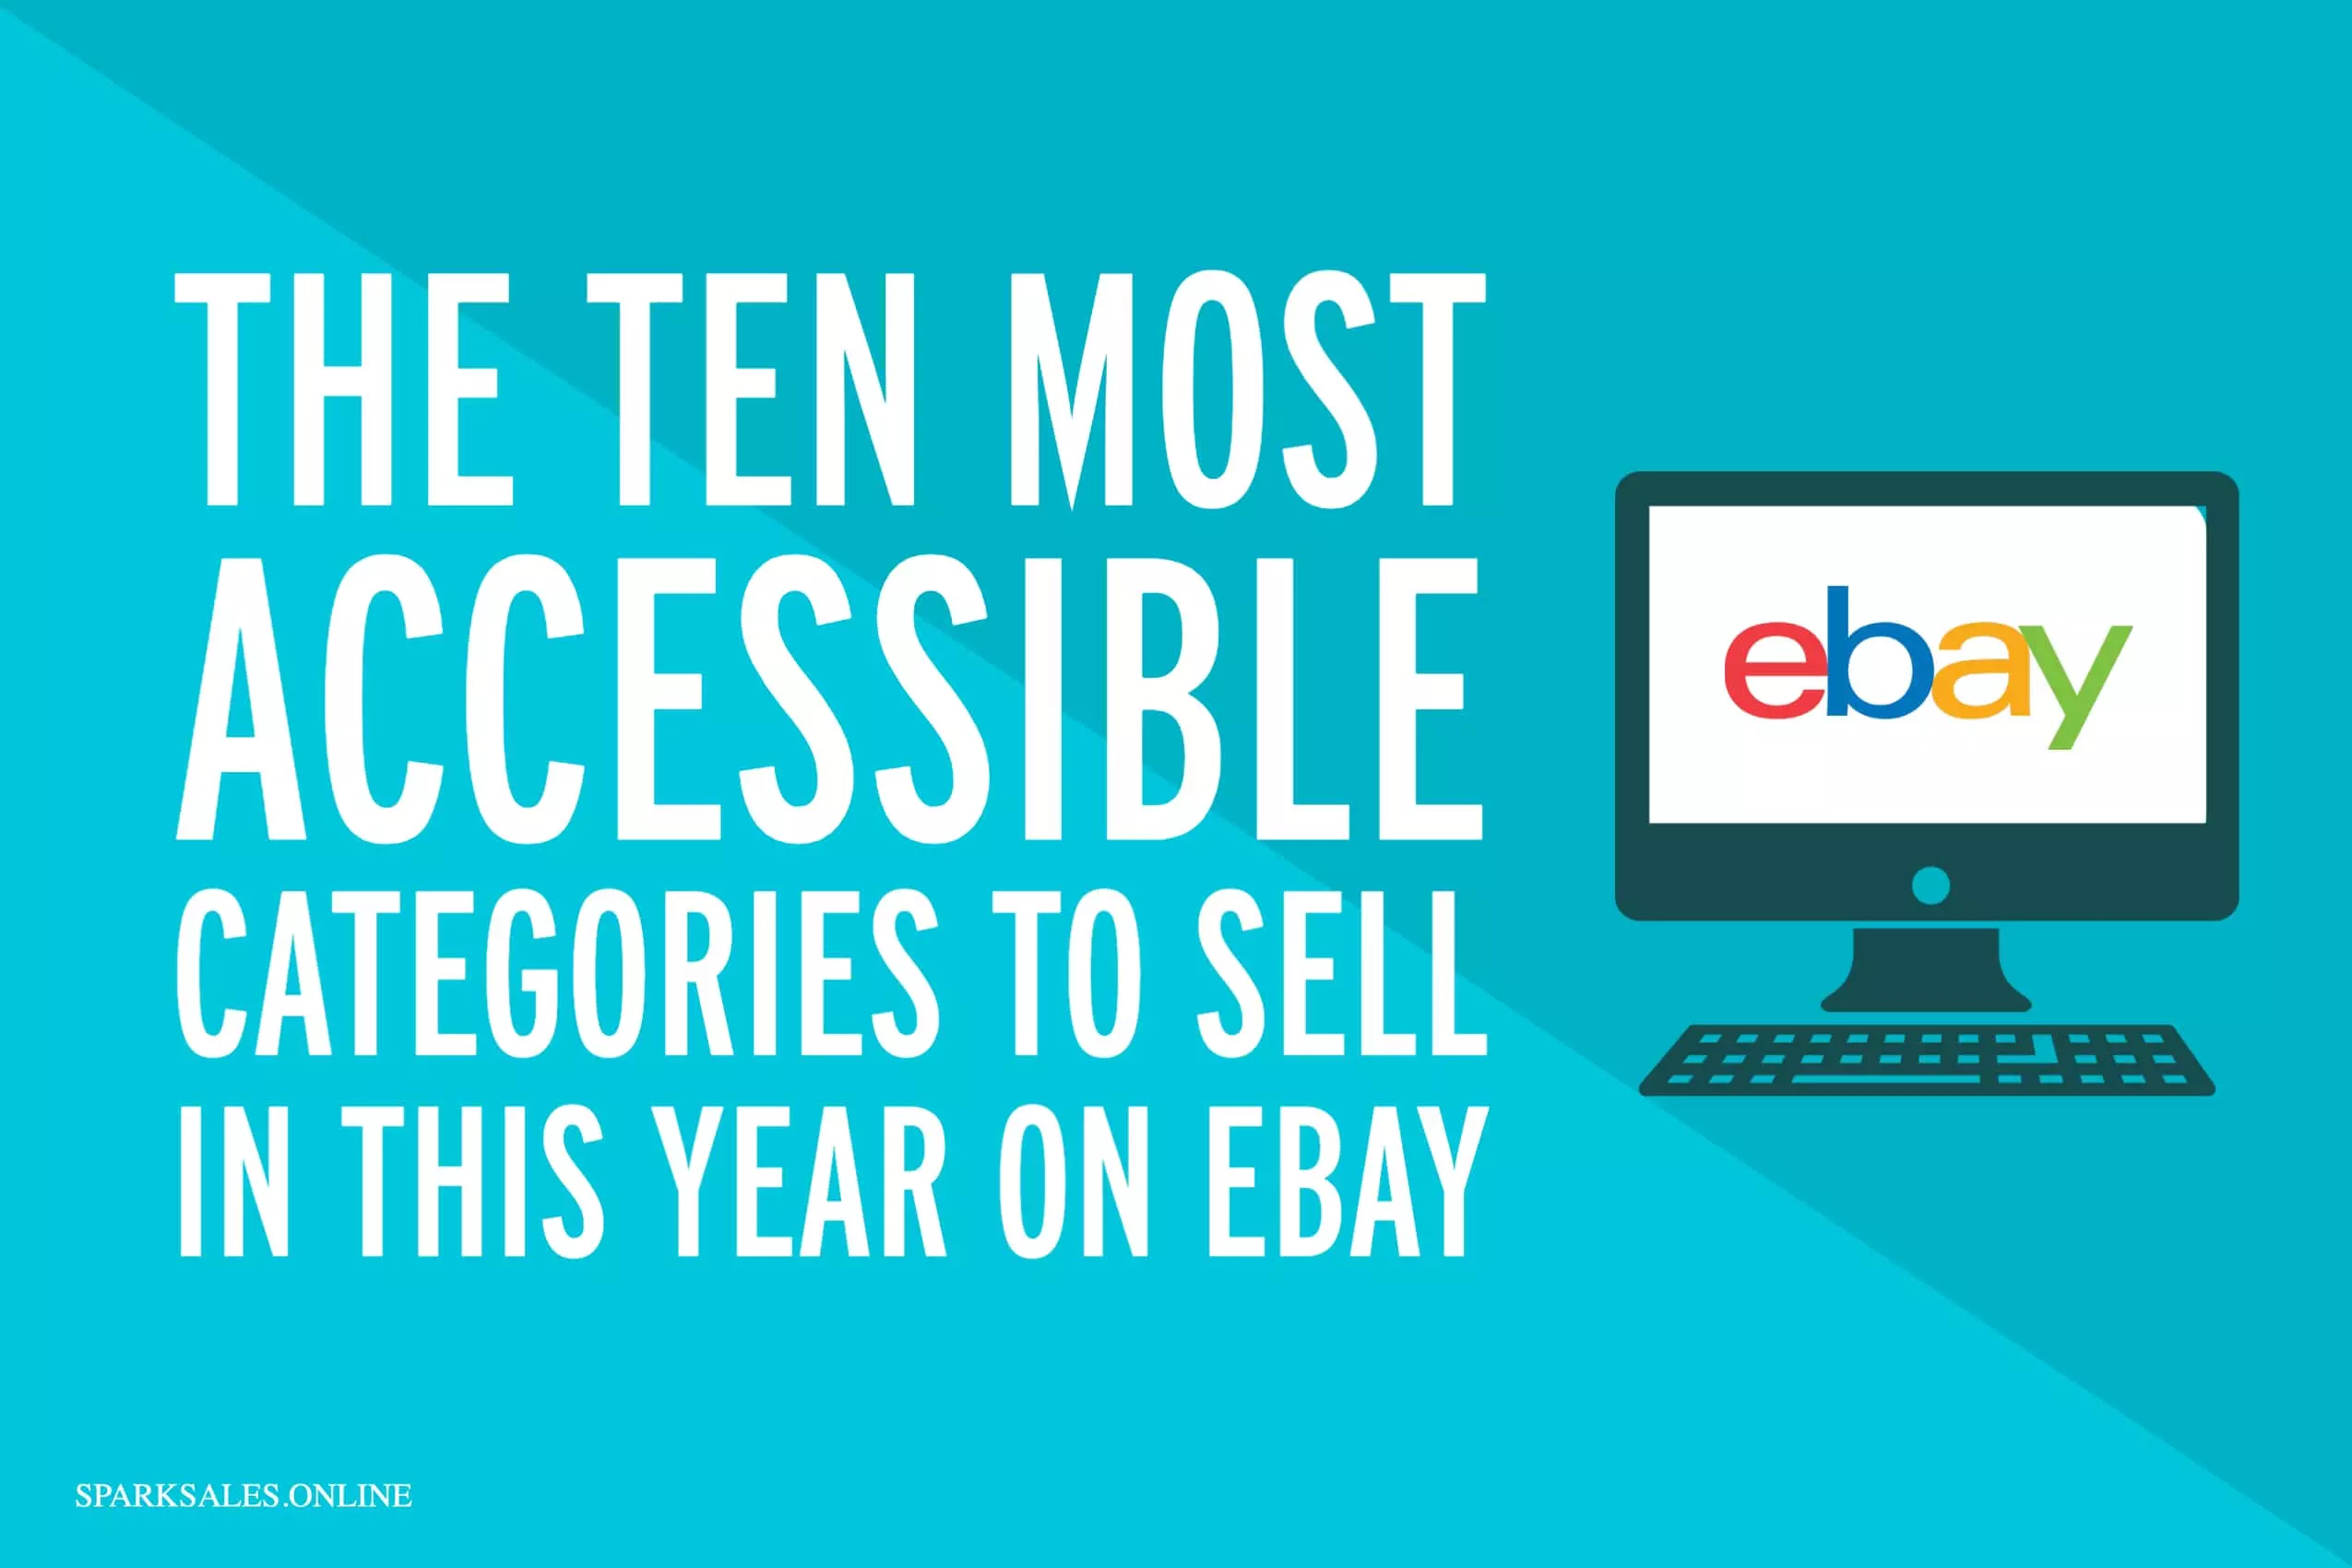 The ten most accessible categories to sell in this year on eBay